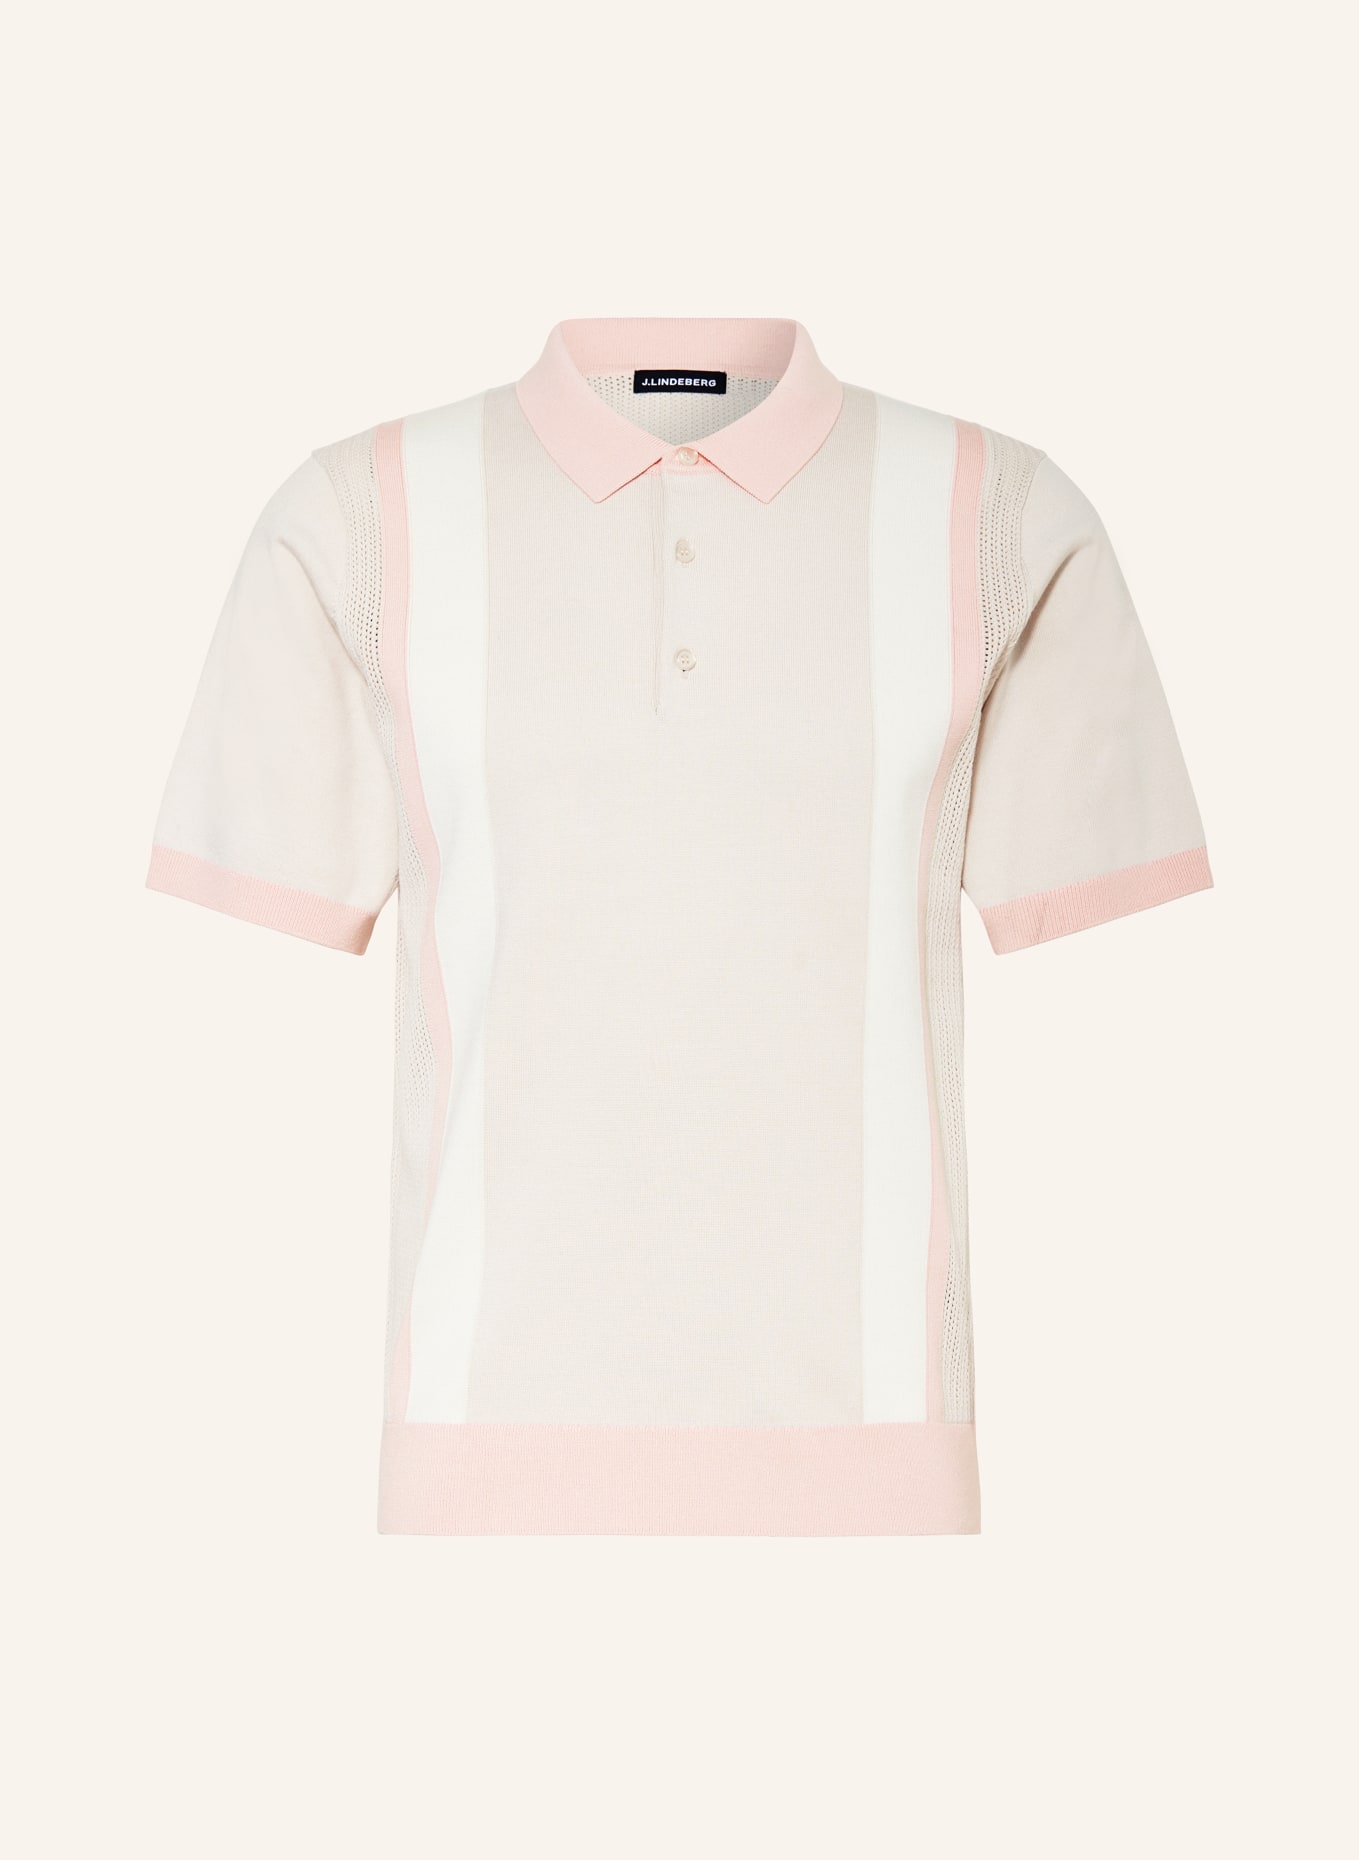 J.LINDEBERG Knitted polo shirt, Color: CREAM/ LIGHT PINK (Image 1)